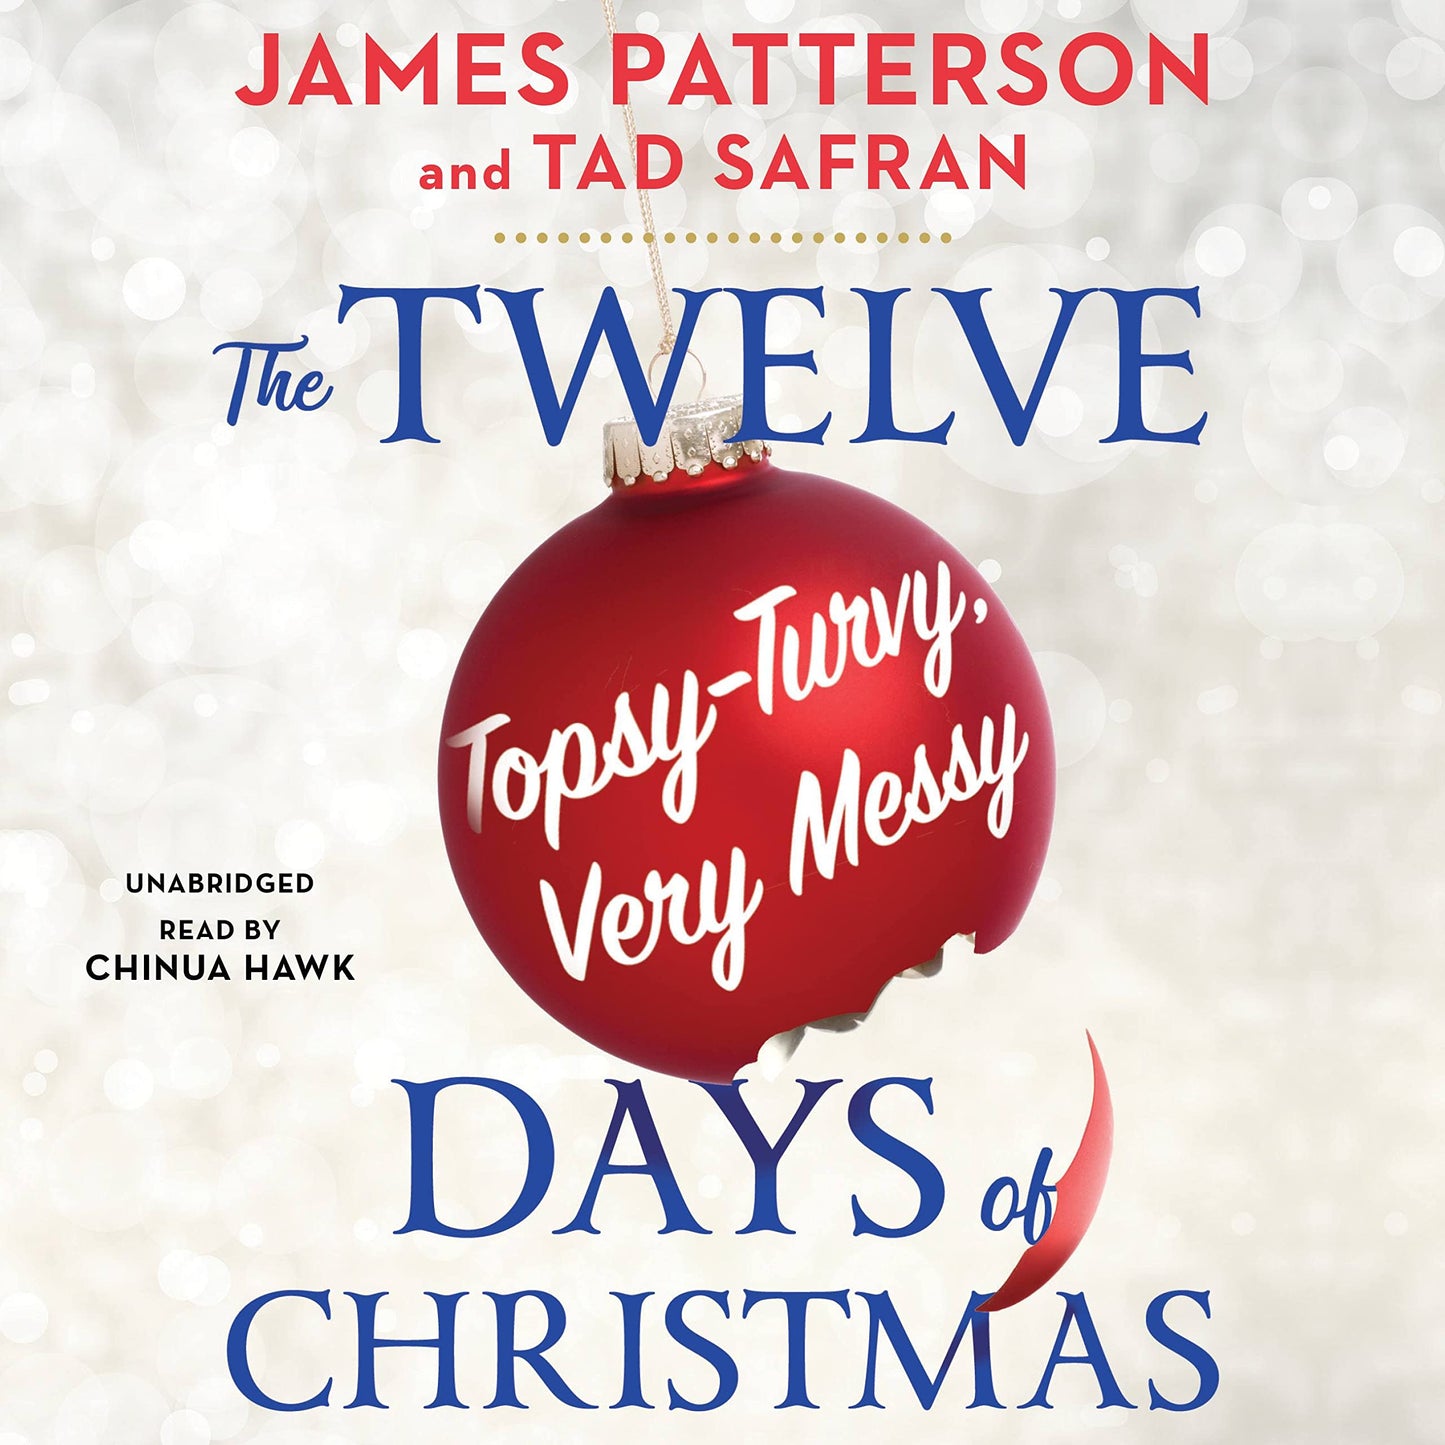 The Twelve Topsy-Turvy, Very Messy Days of Christmas: The New Holiday Classic People Will Be Reading for Generations